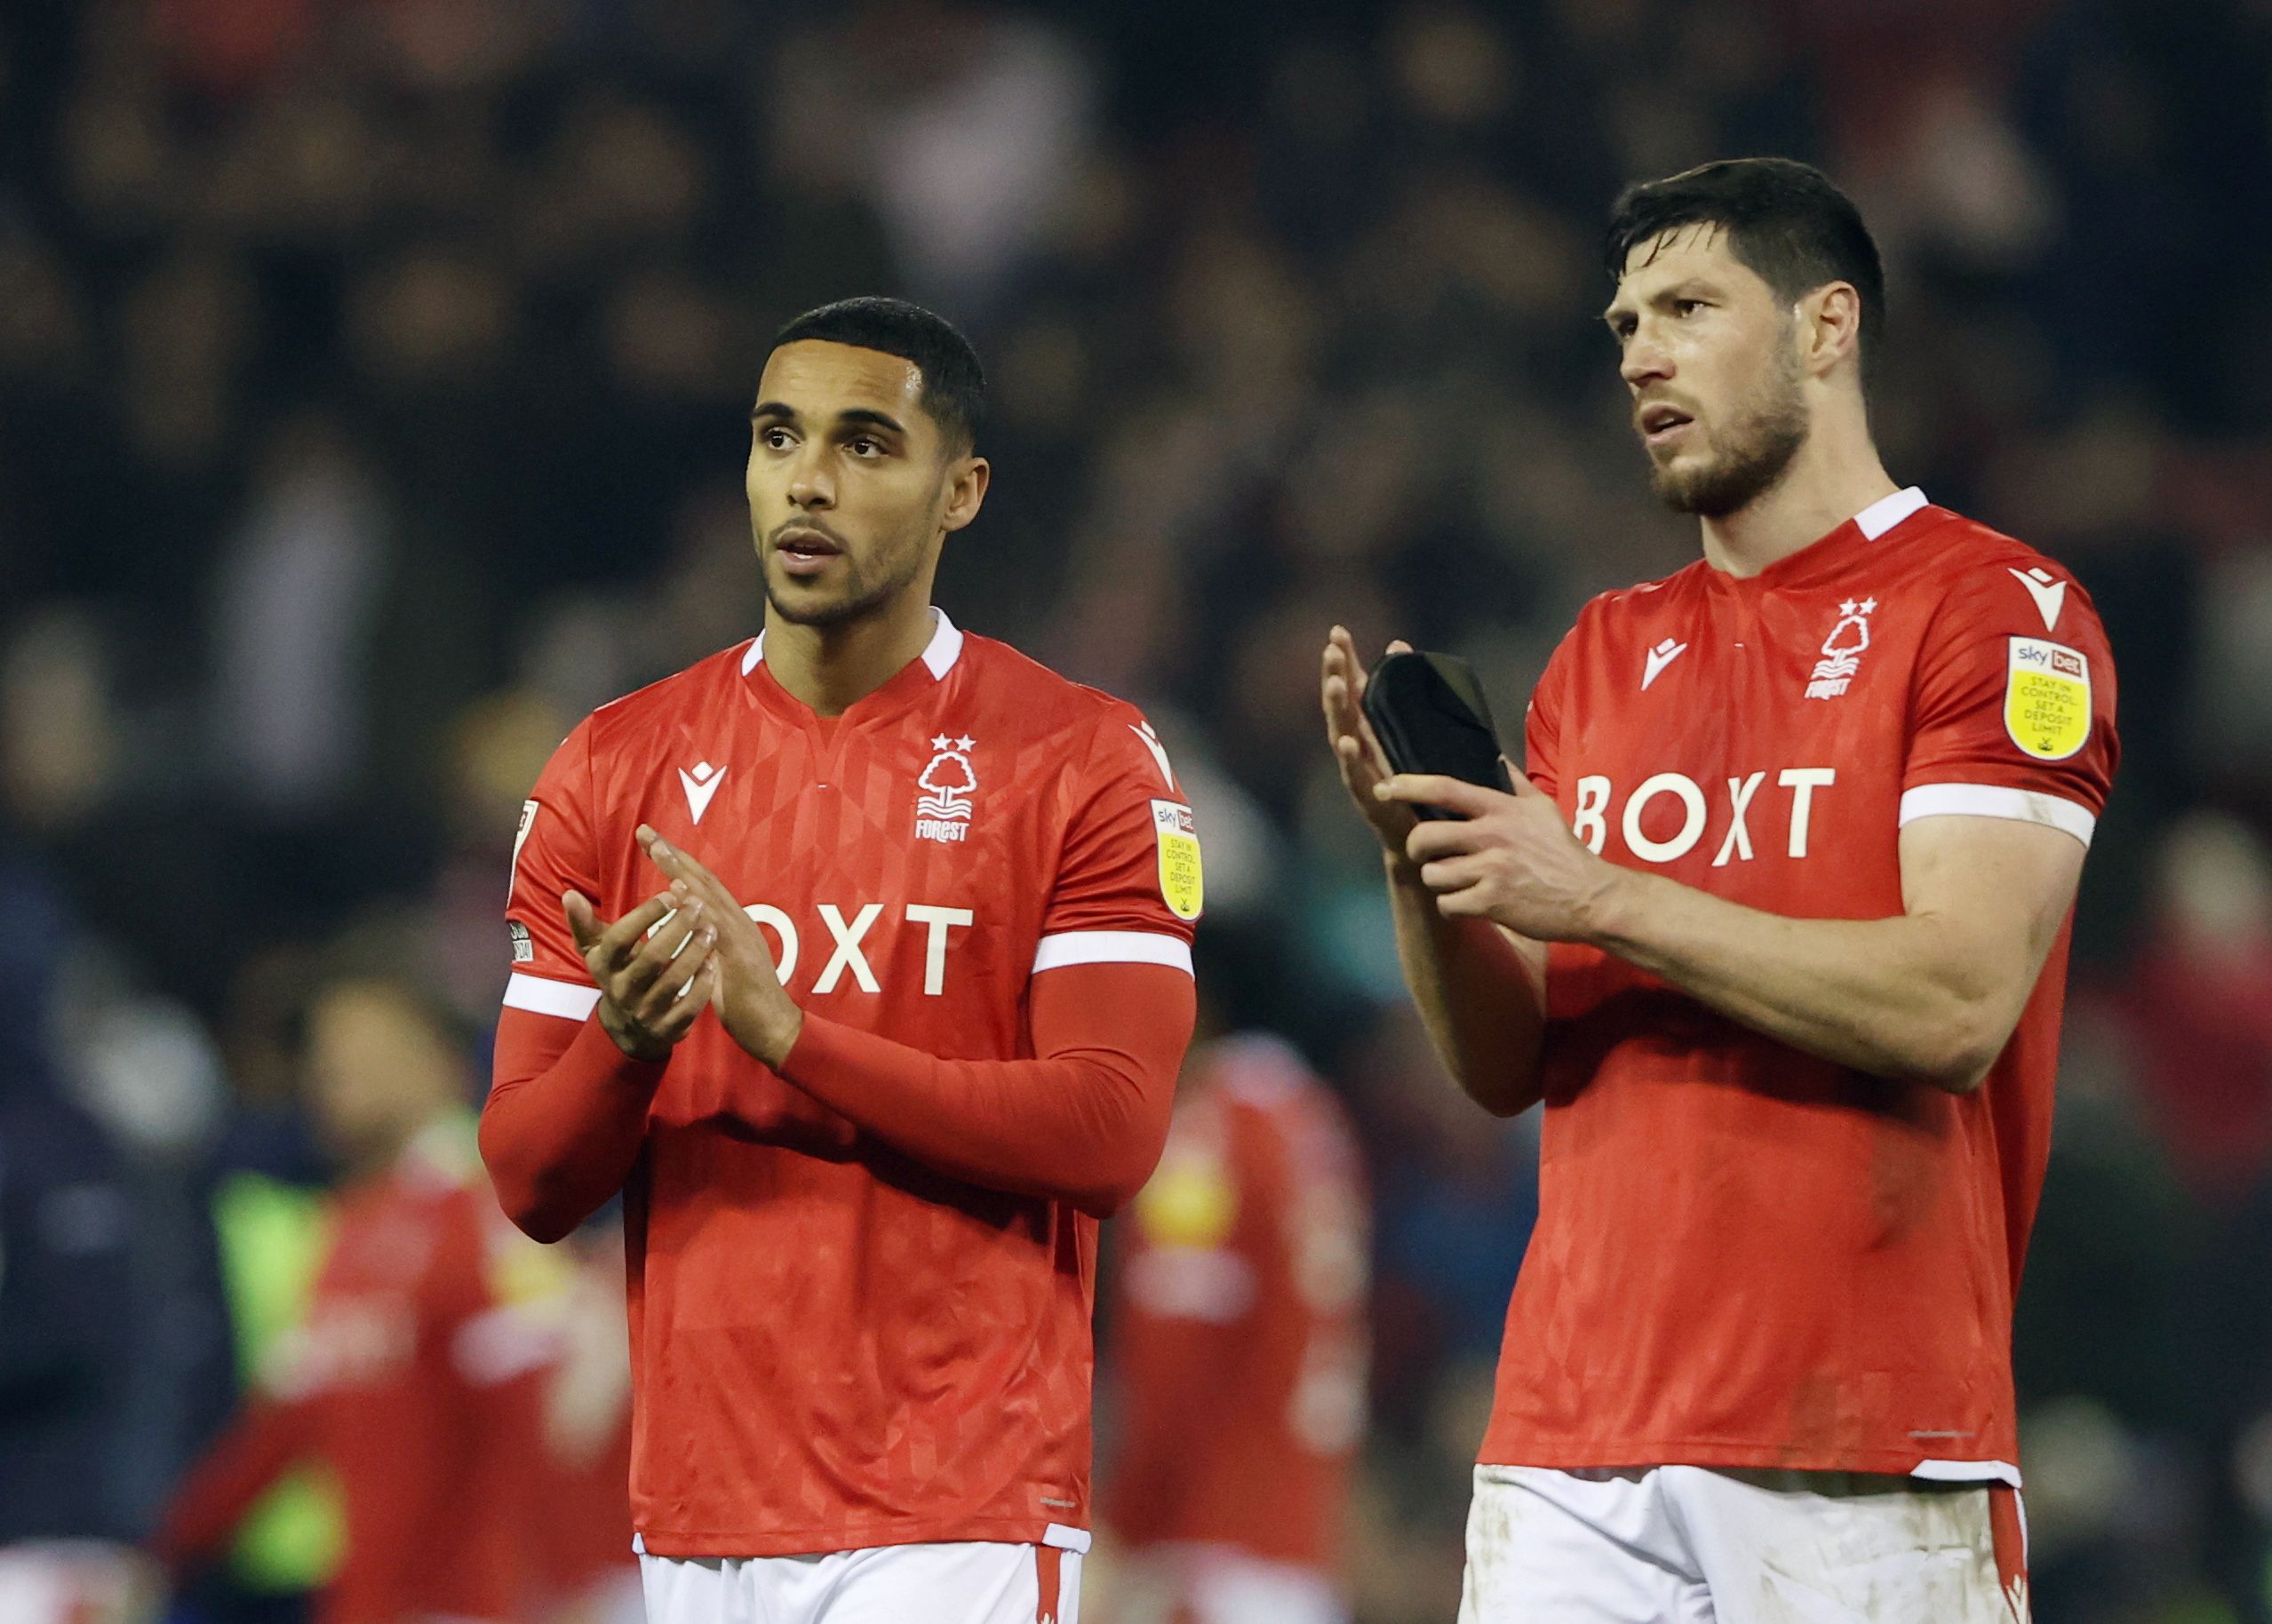 Soccer Football - Championship -  Nottingham Forest v Barnsley - City Ground, Nottingham, Britain - January 25, 2022 Nottingham Forest's Max Lowe and Scott McKenna after the match   Action Images/Molly Darlington  EDITORIAL USE ONLY. No use with unauthorized audio, video, data, fixture lists, club/league logos or 